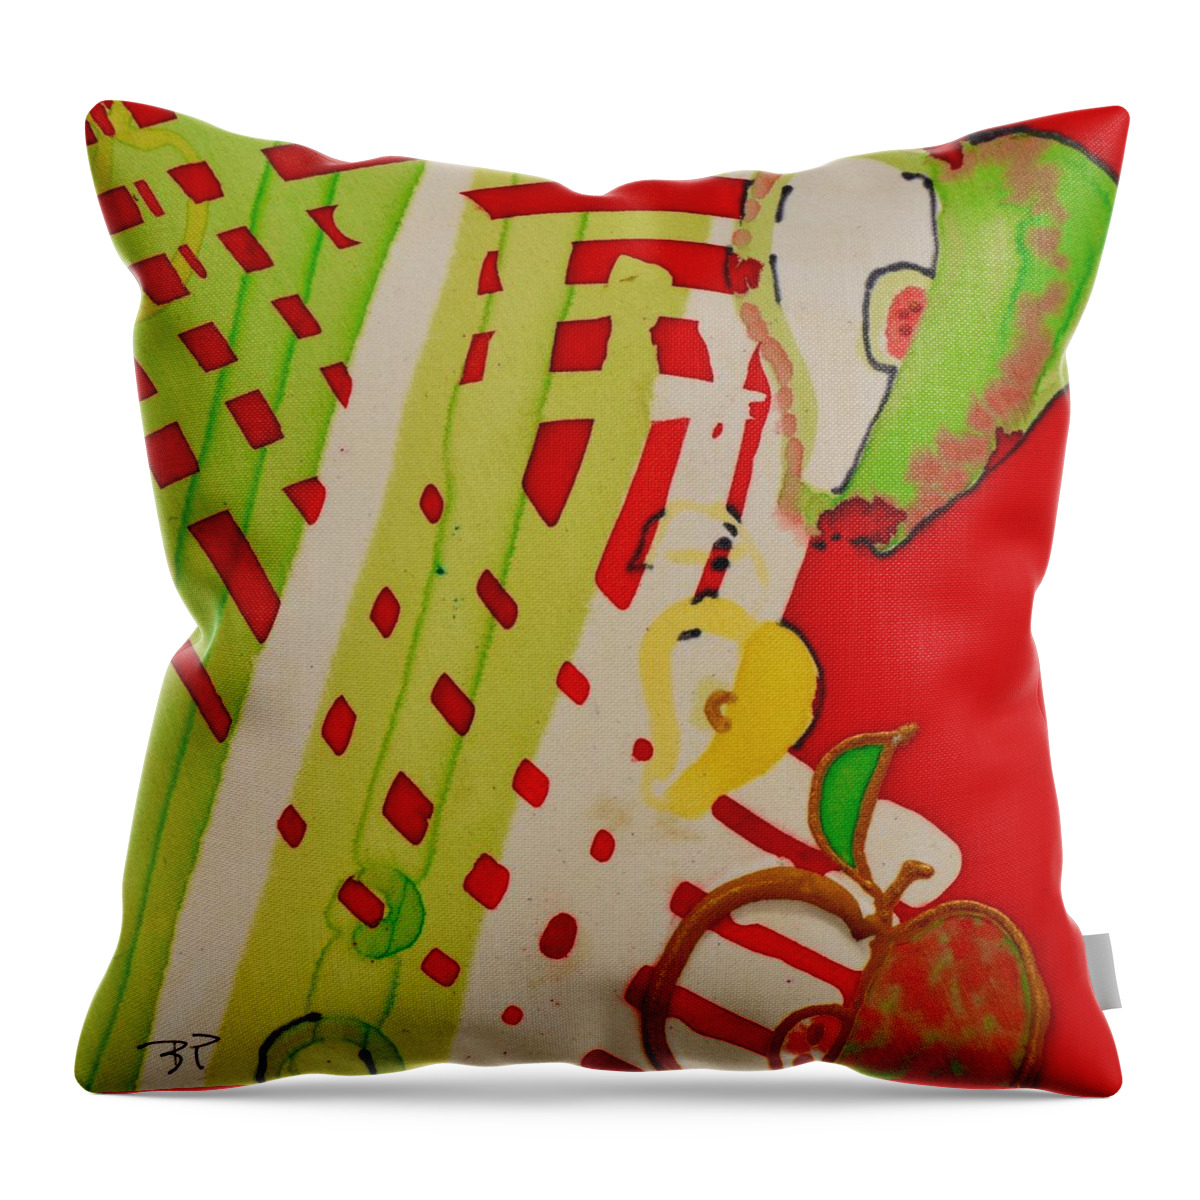  Throw Pillow featuring the painting Apple Slice by Barbara Pease